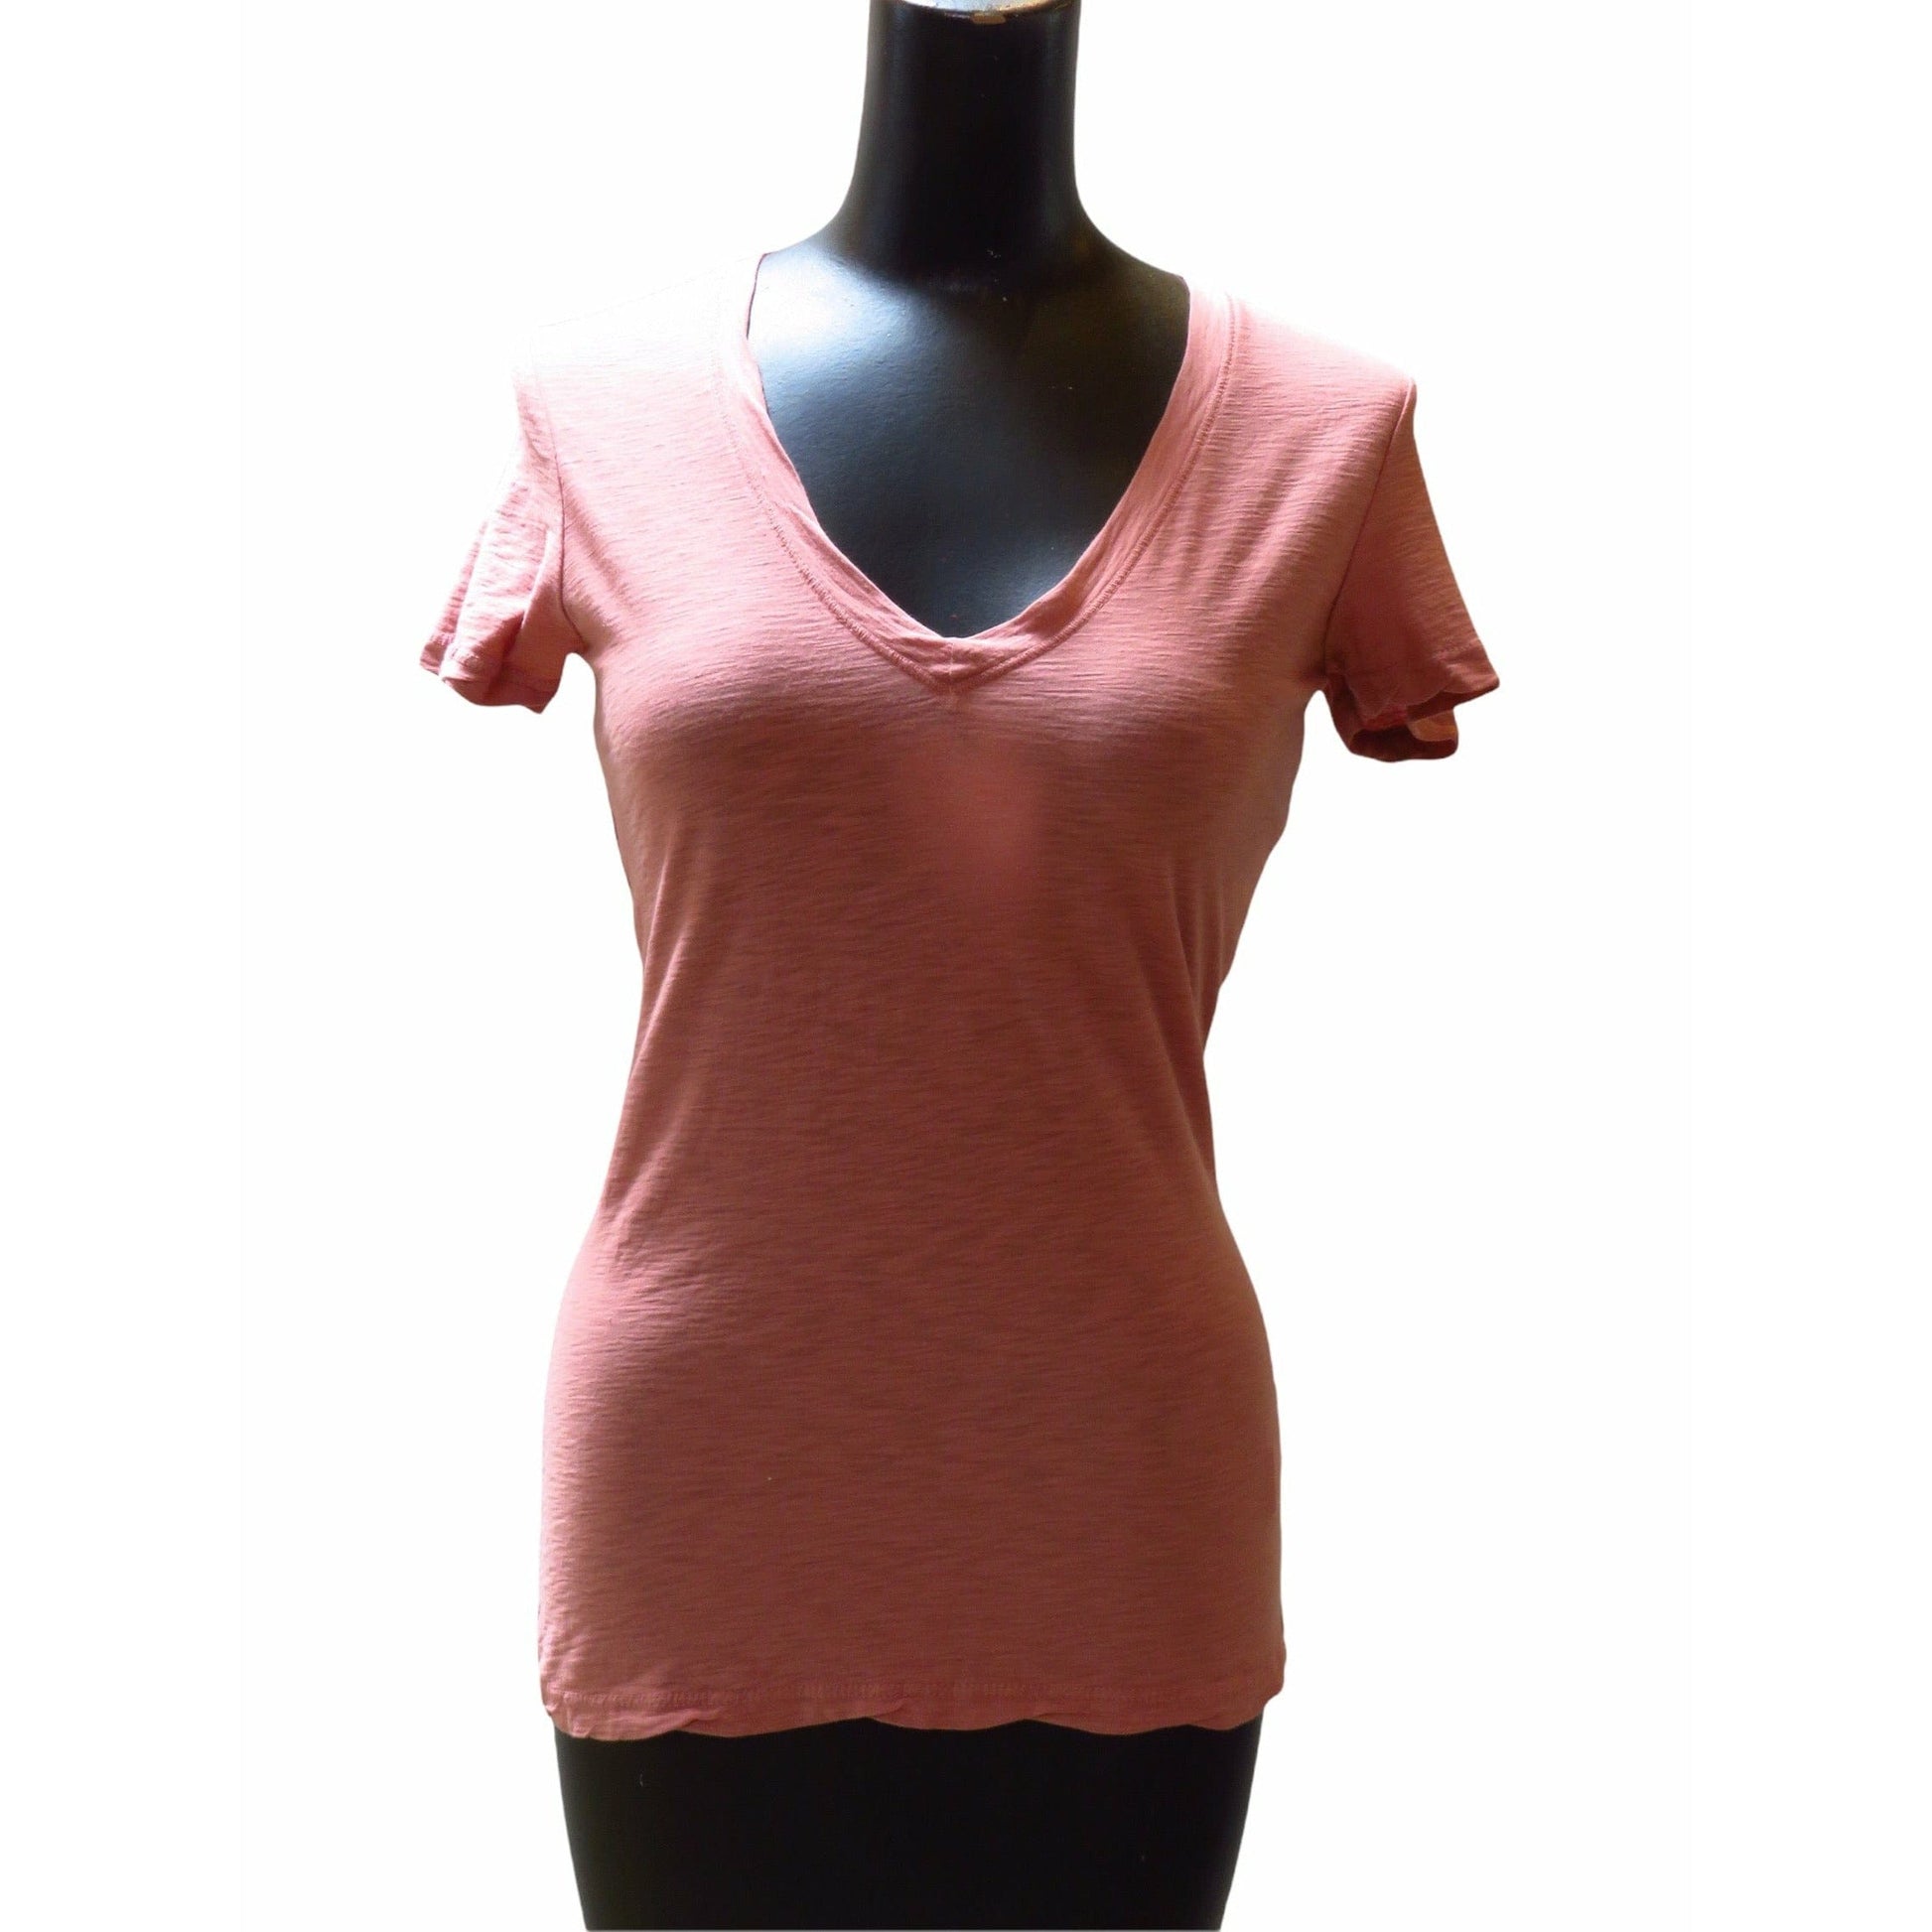 James Perse Shirts & Tops 3 / old Rose / Cotton James Perse Casual V-Neck Tee